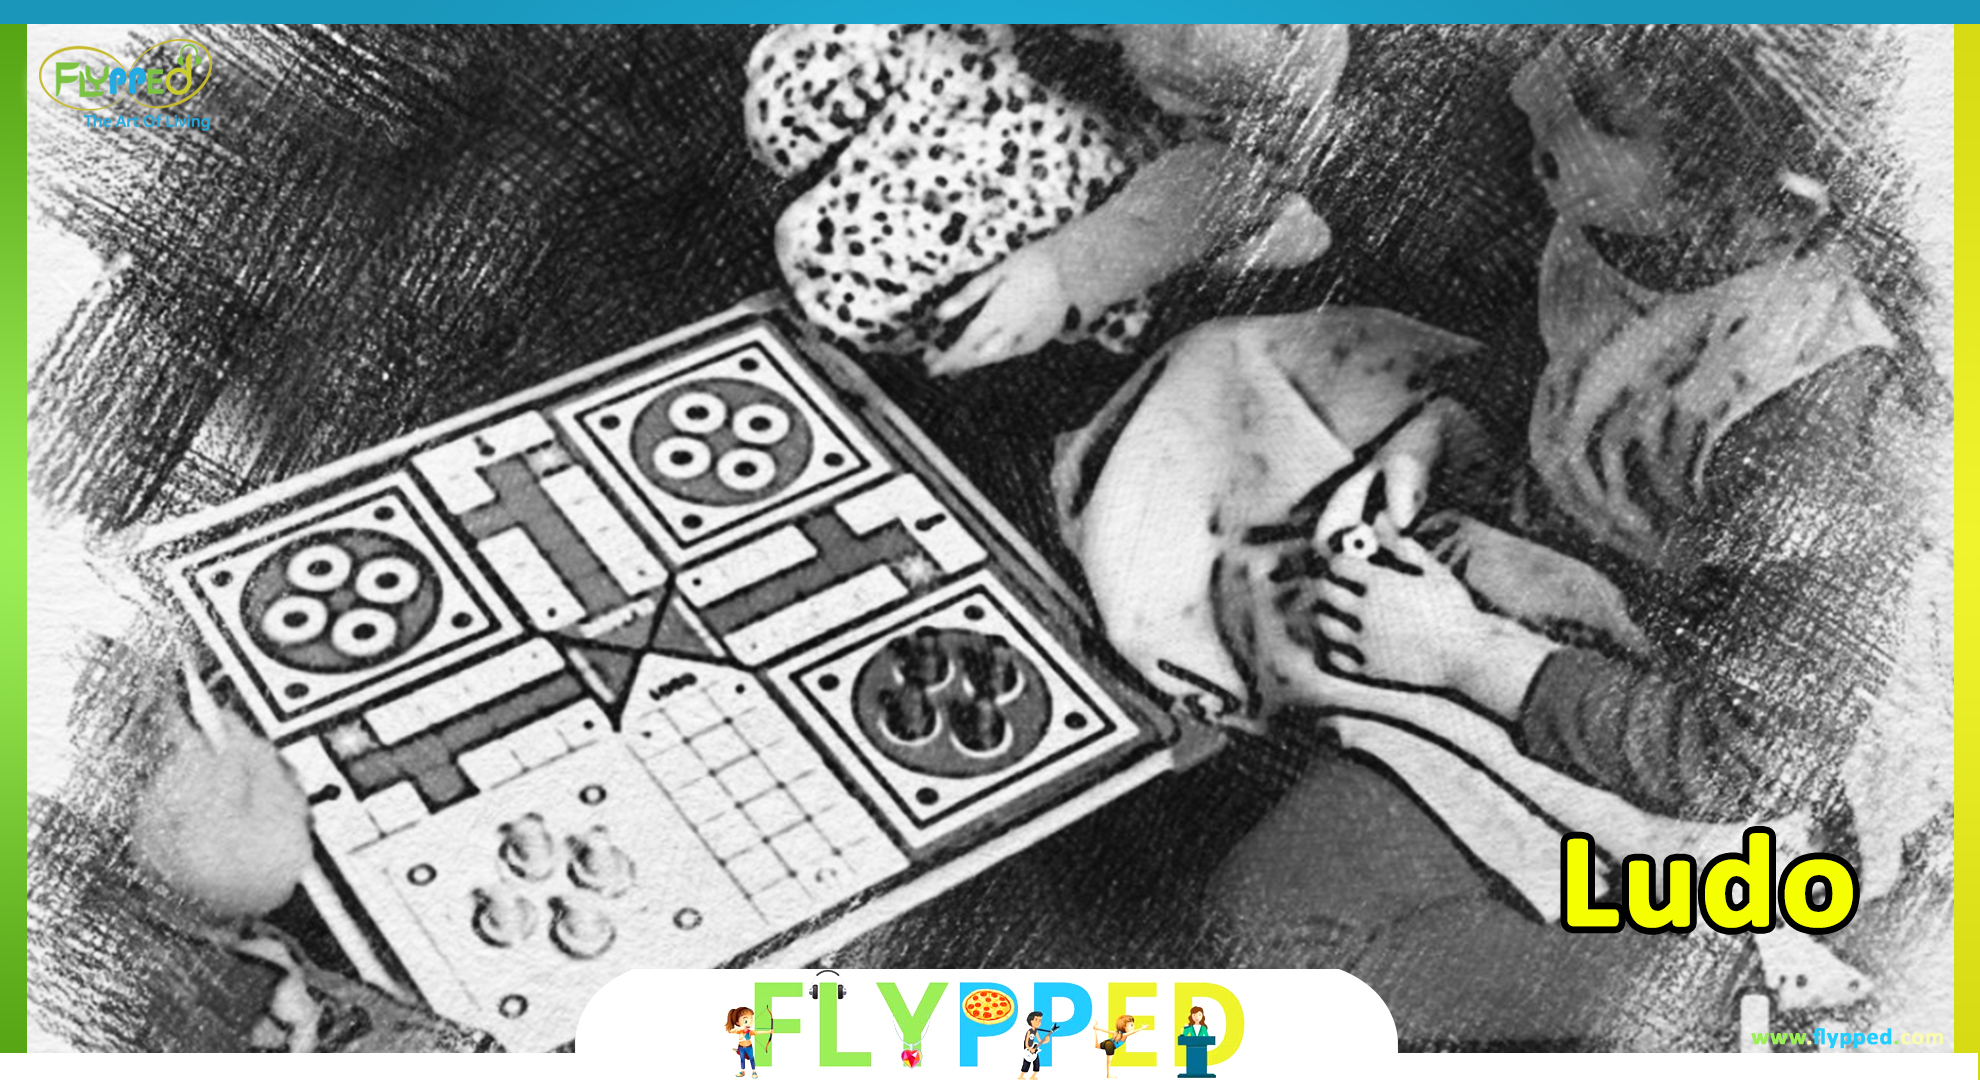 17-Games-that-will-take-you-back-to-your-childhood-memories-Ludo